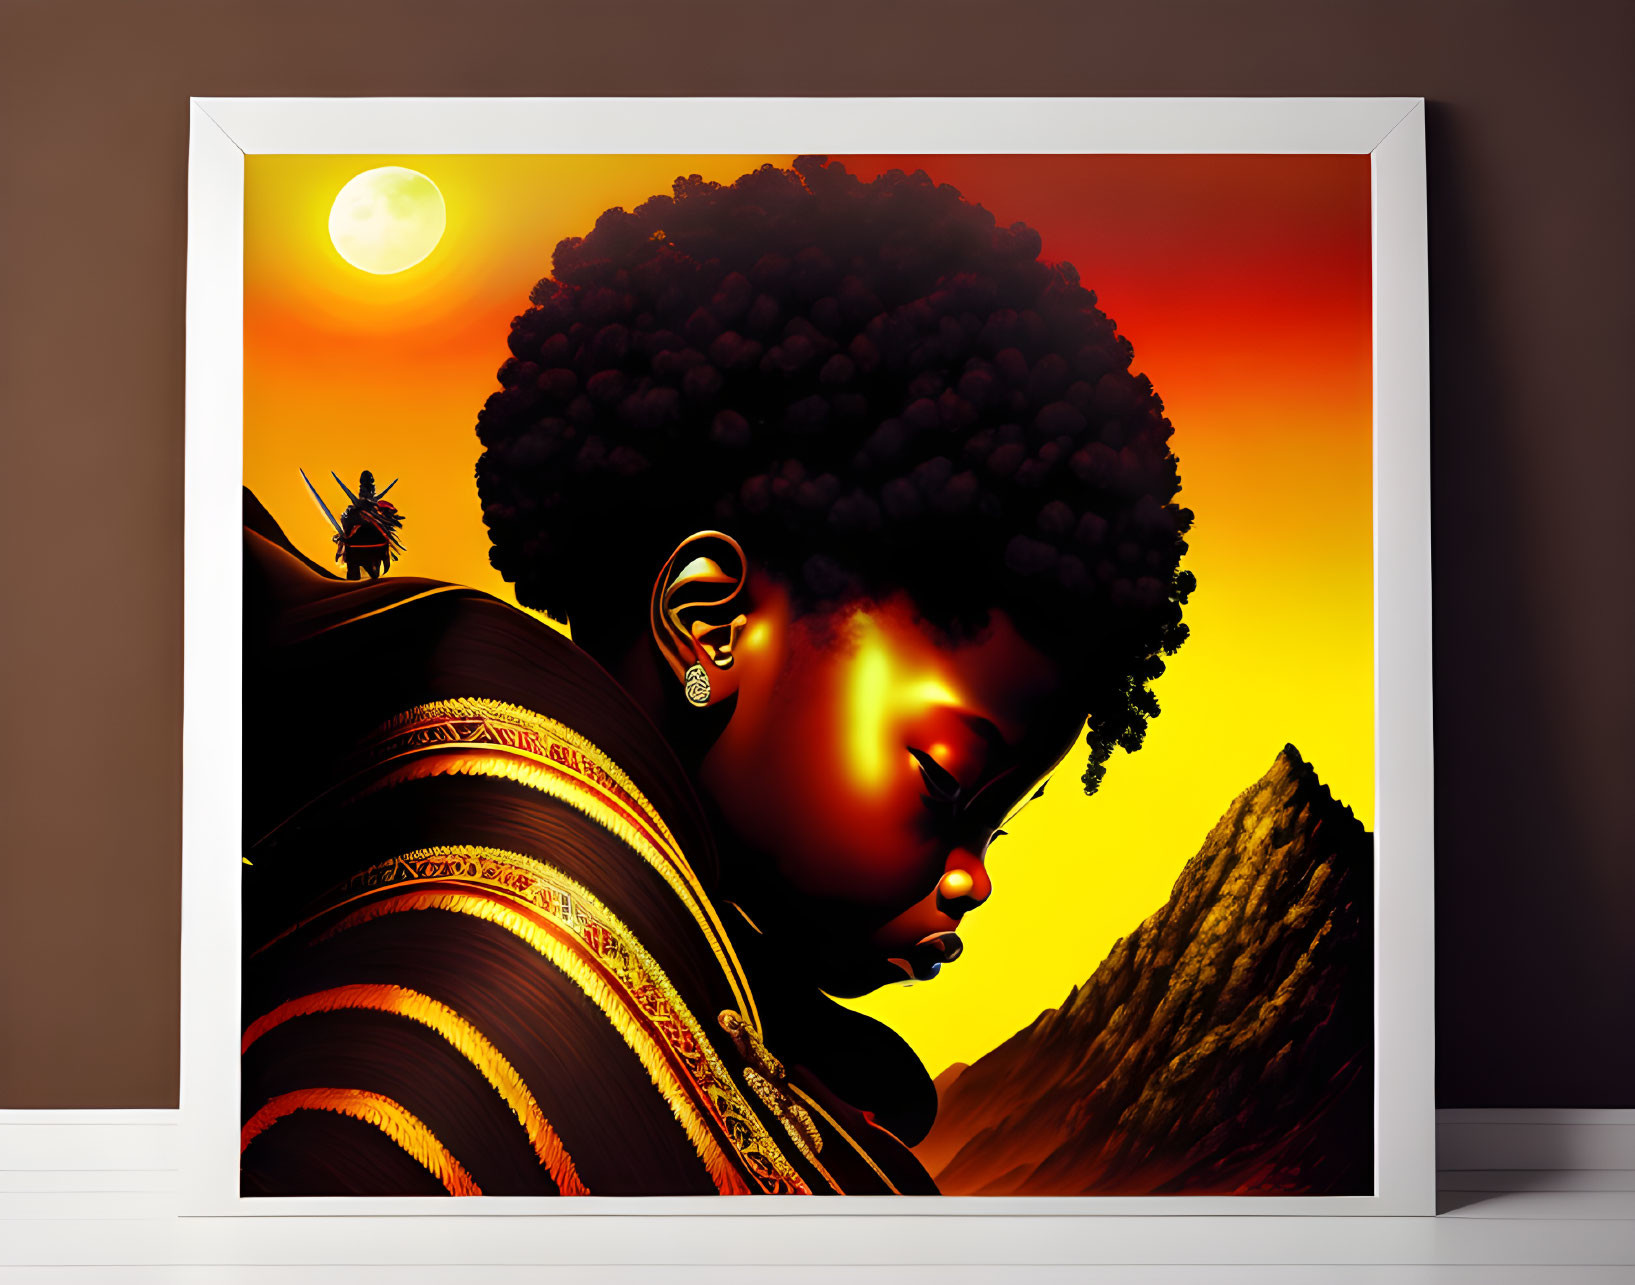 Profile View of African Woman with Afro Against Orange Sunset